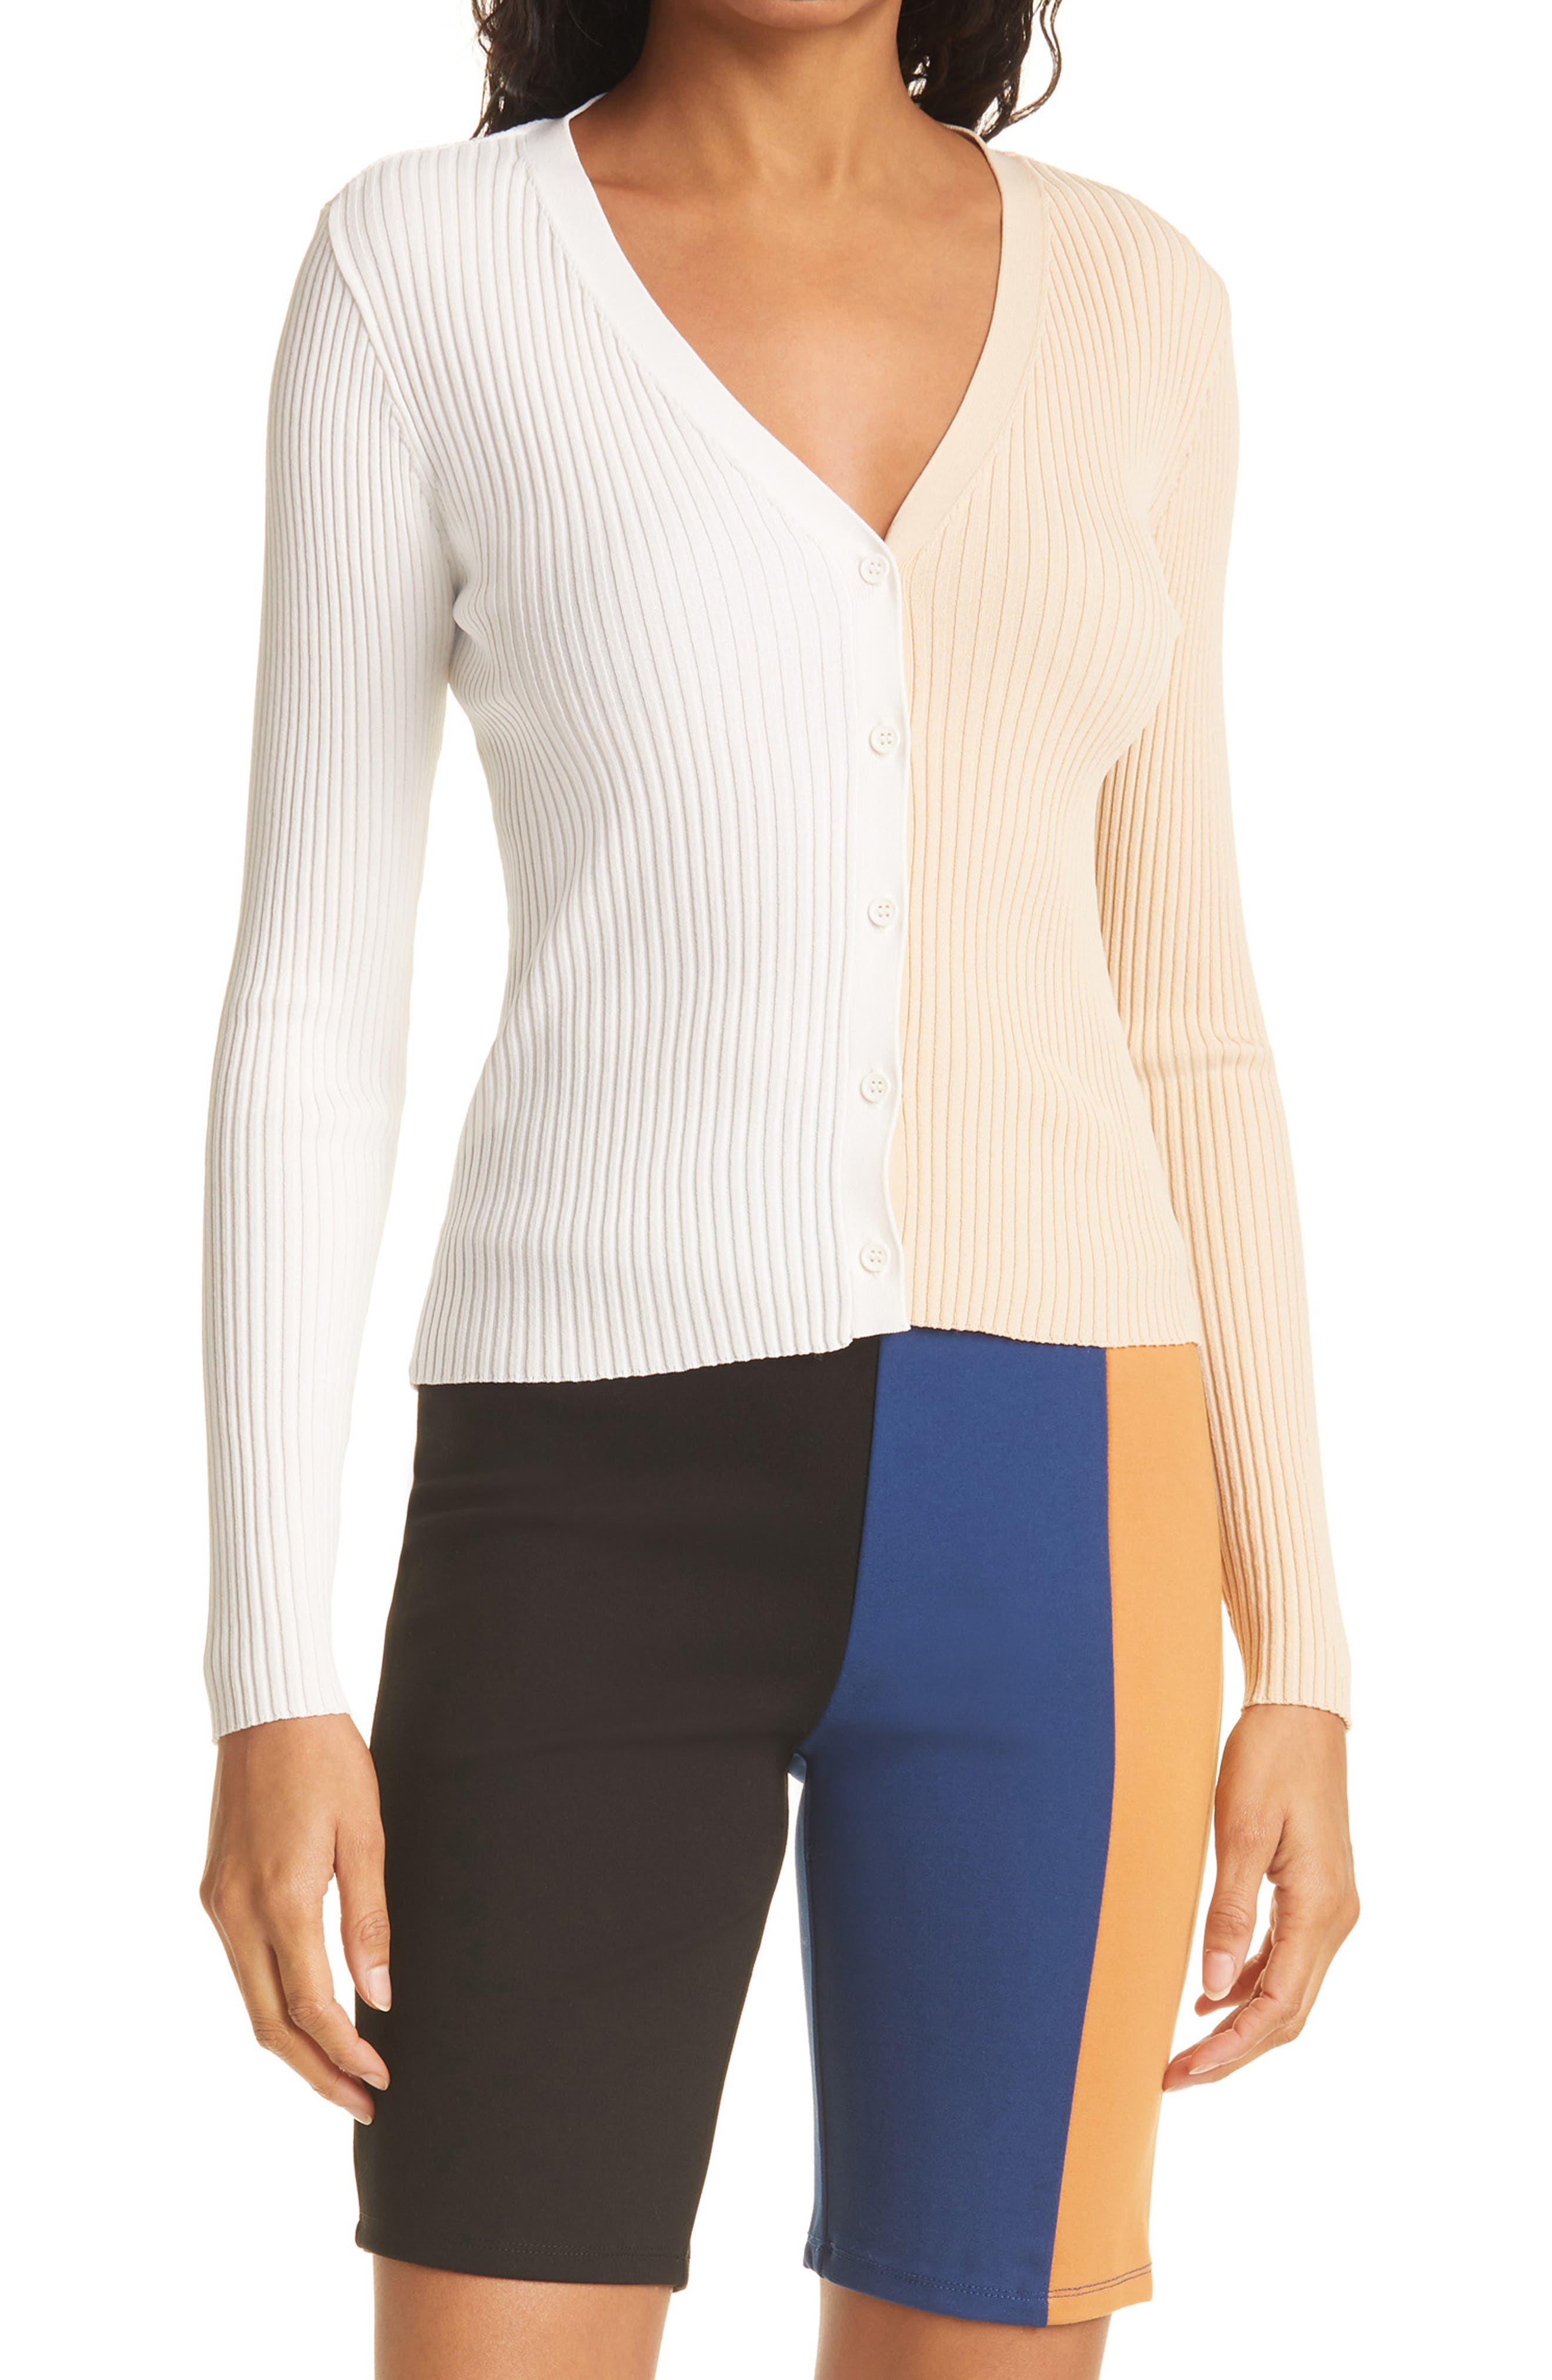 STAUD Cargo Colorblock Sweater in Biscotti/White at Nordstrom, Size Small